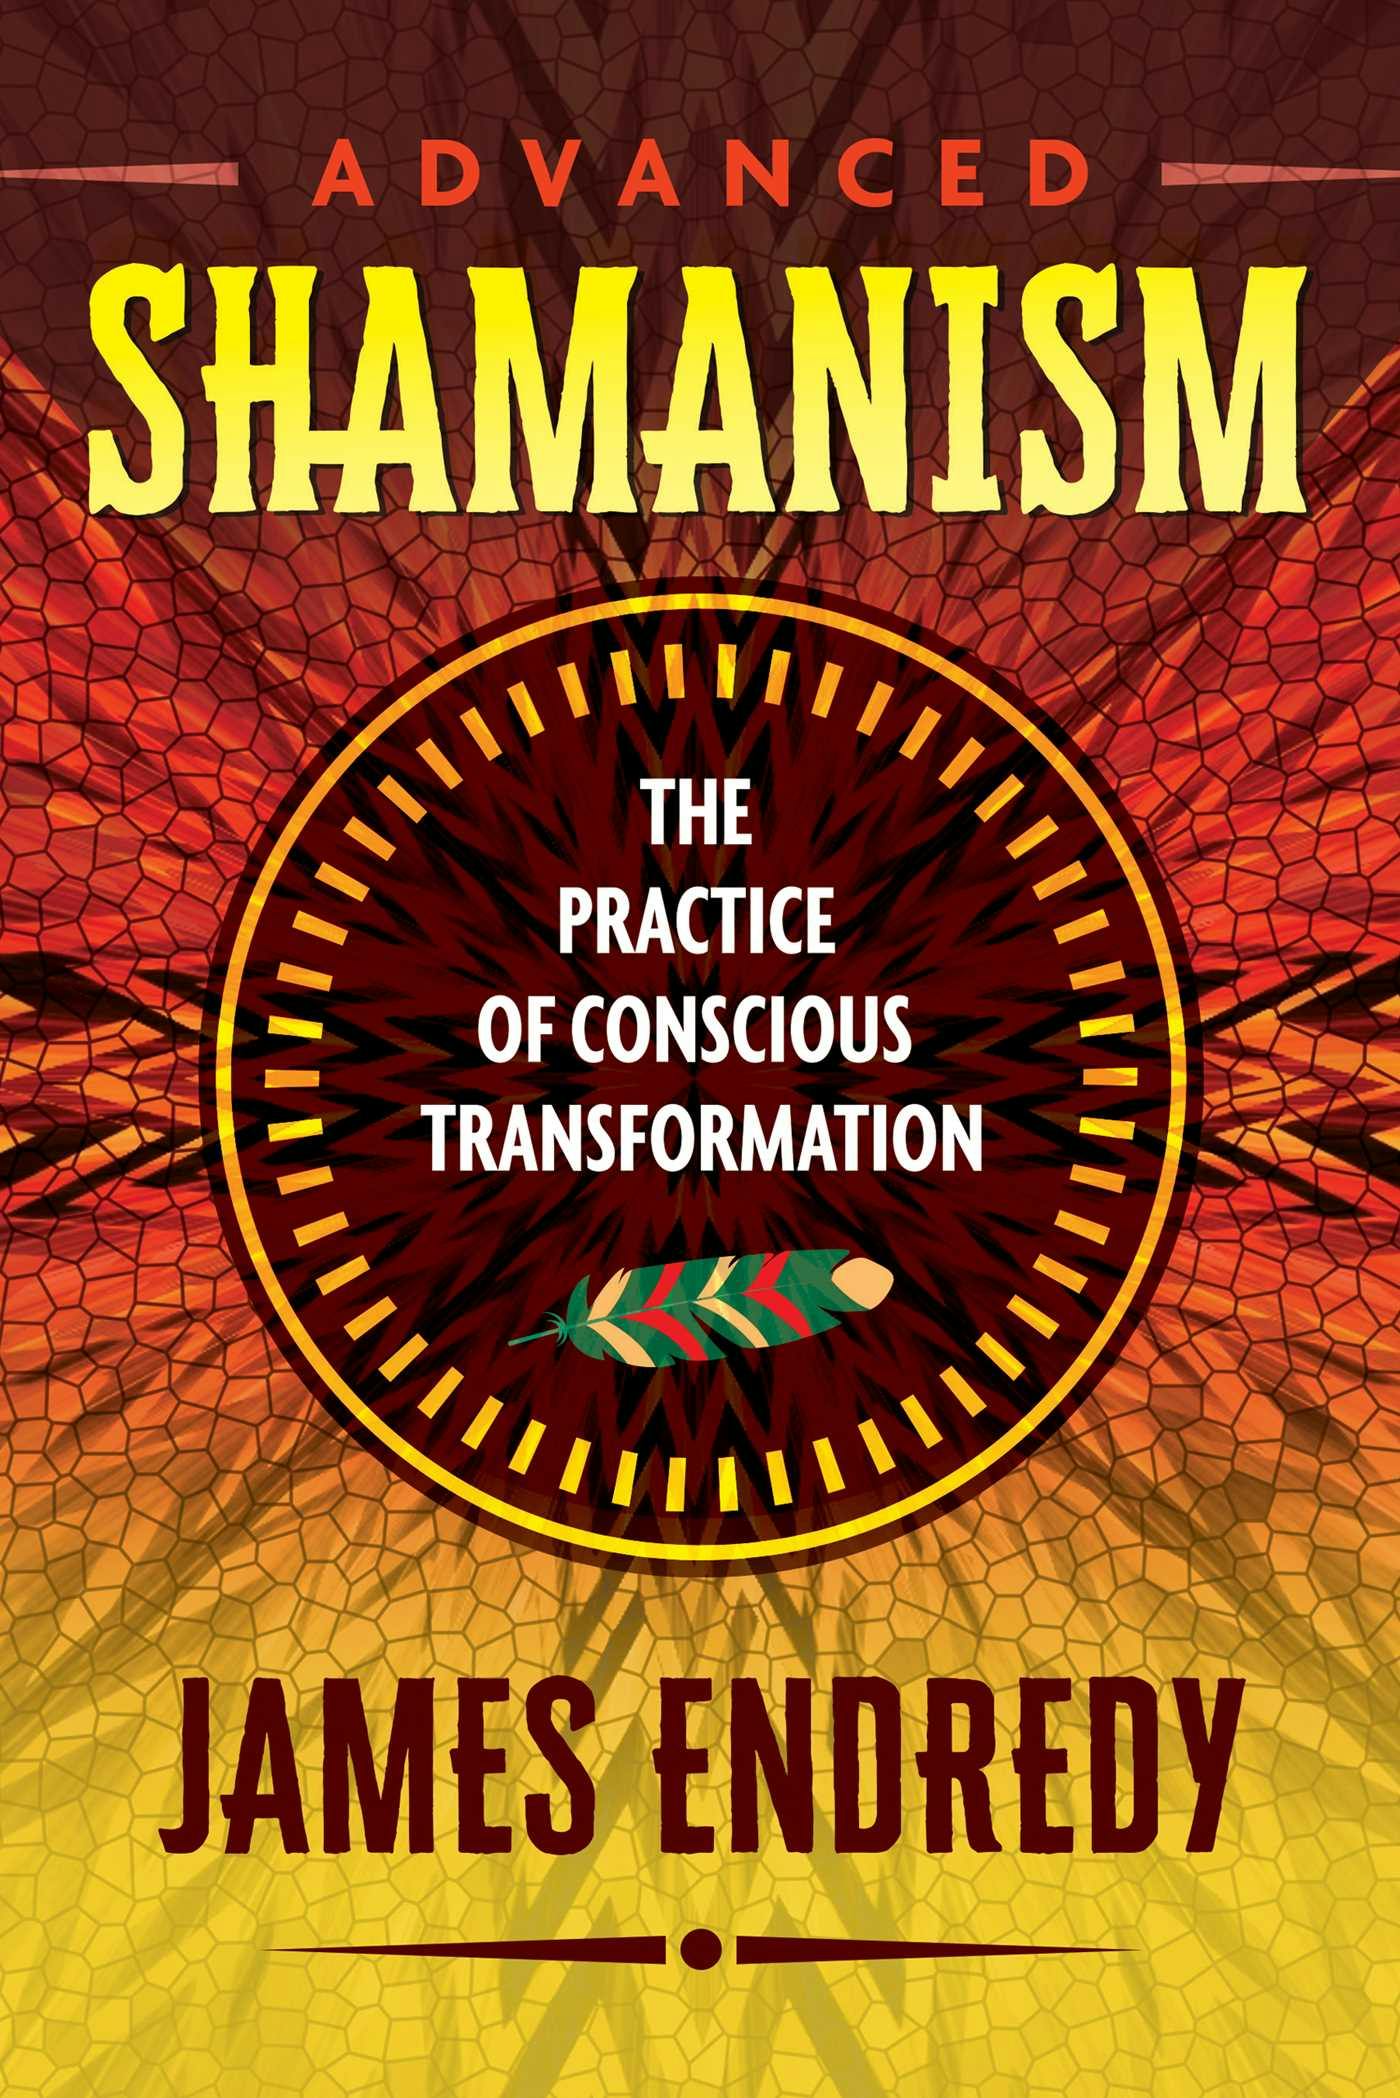 Advanced Shamanism: The Practice of Conscious Transformation - James Endredy